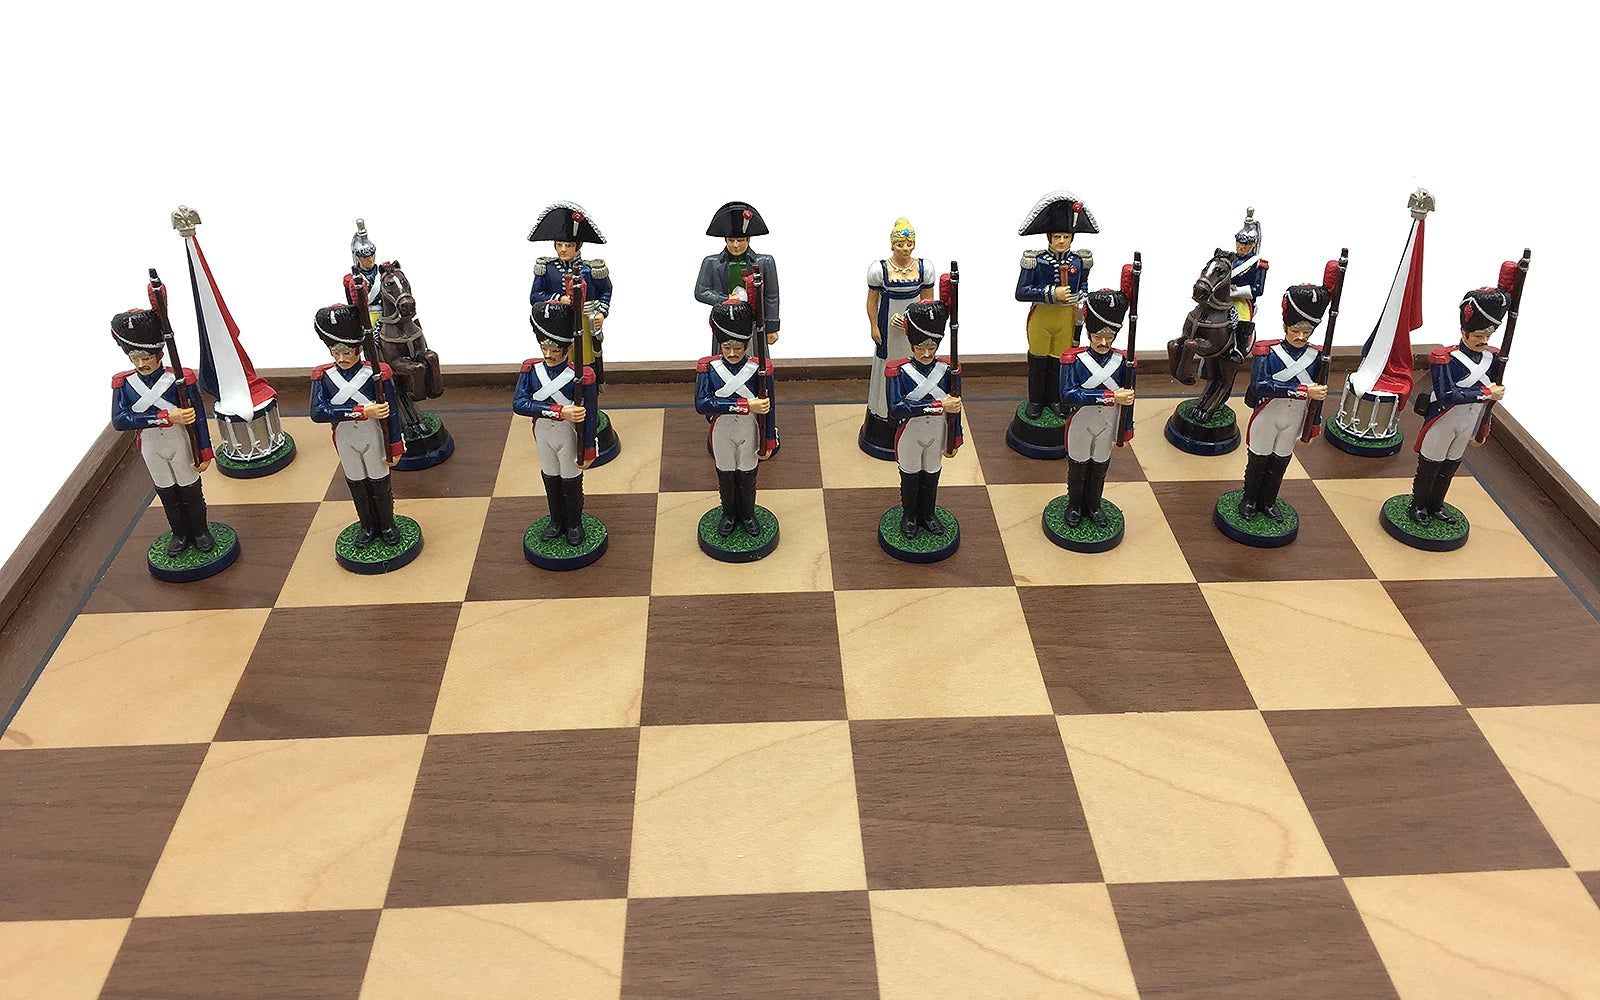 Toy soldier chess set Battle of Waterloo. Hand painted. British troops.